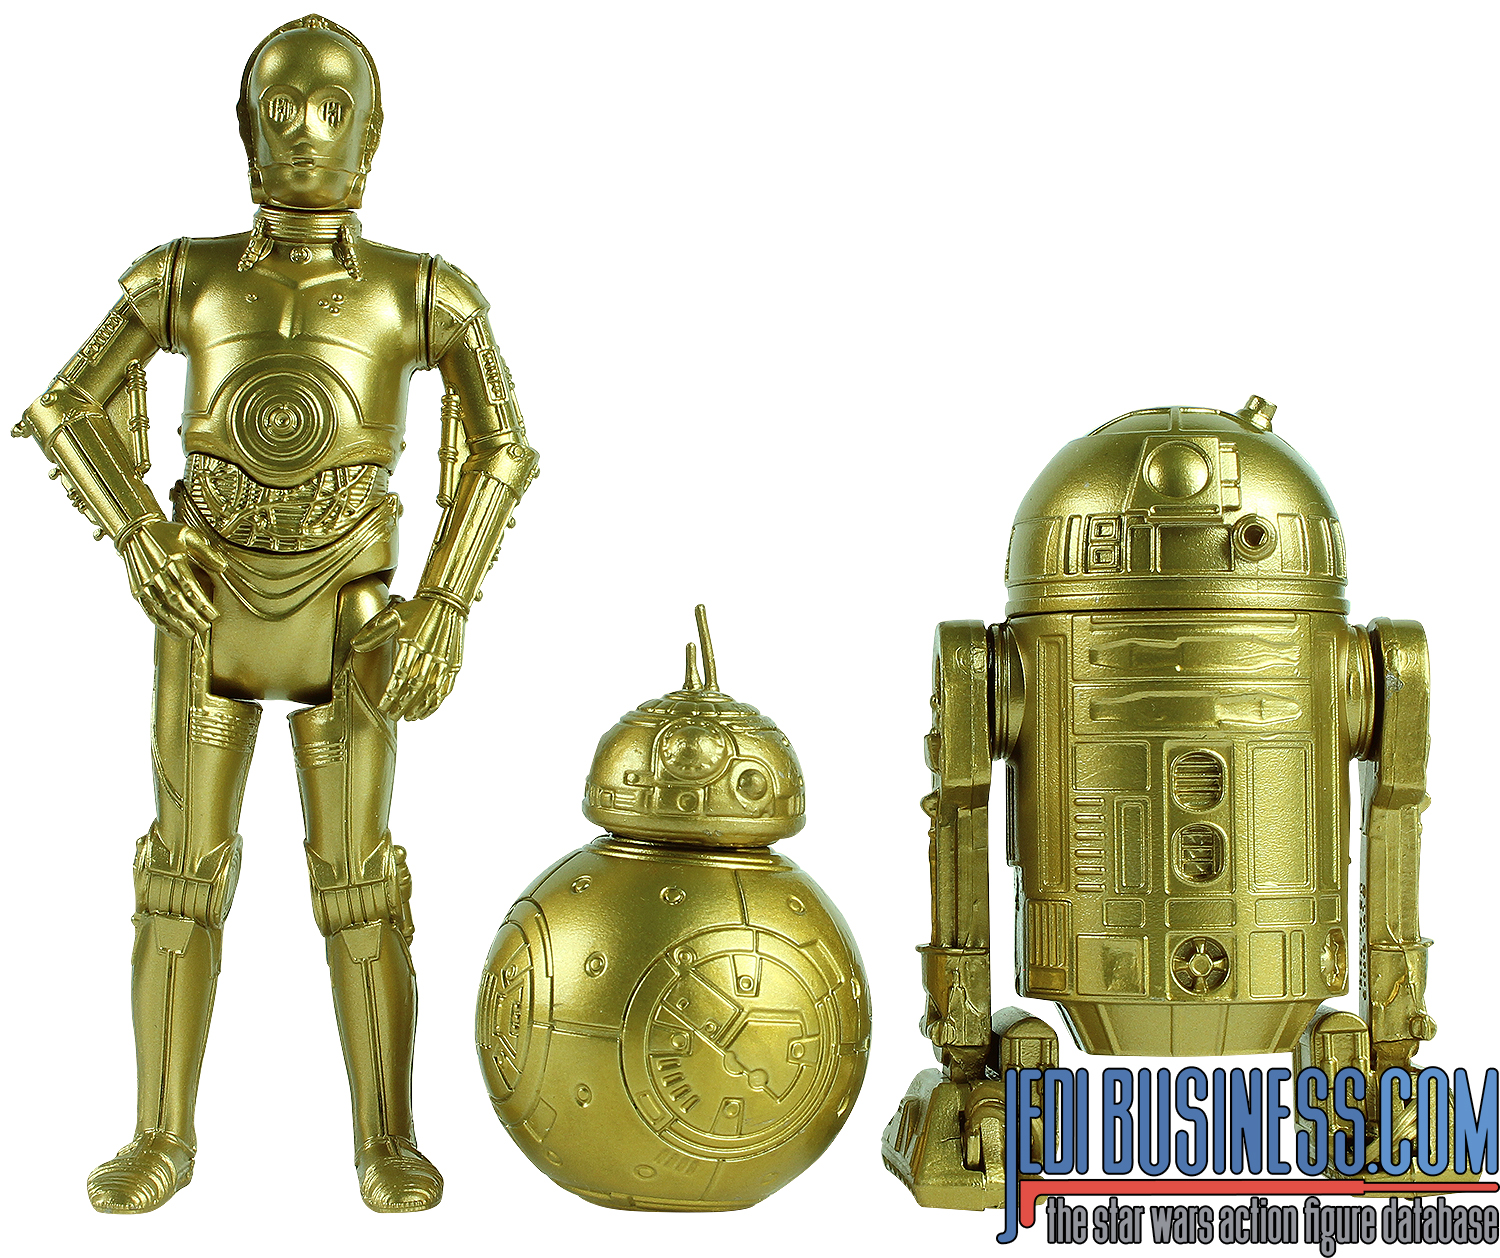 C-3PO Episode 9 - Bundled With BB-8 And R2-D2